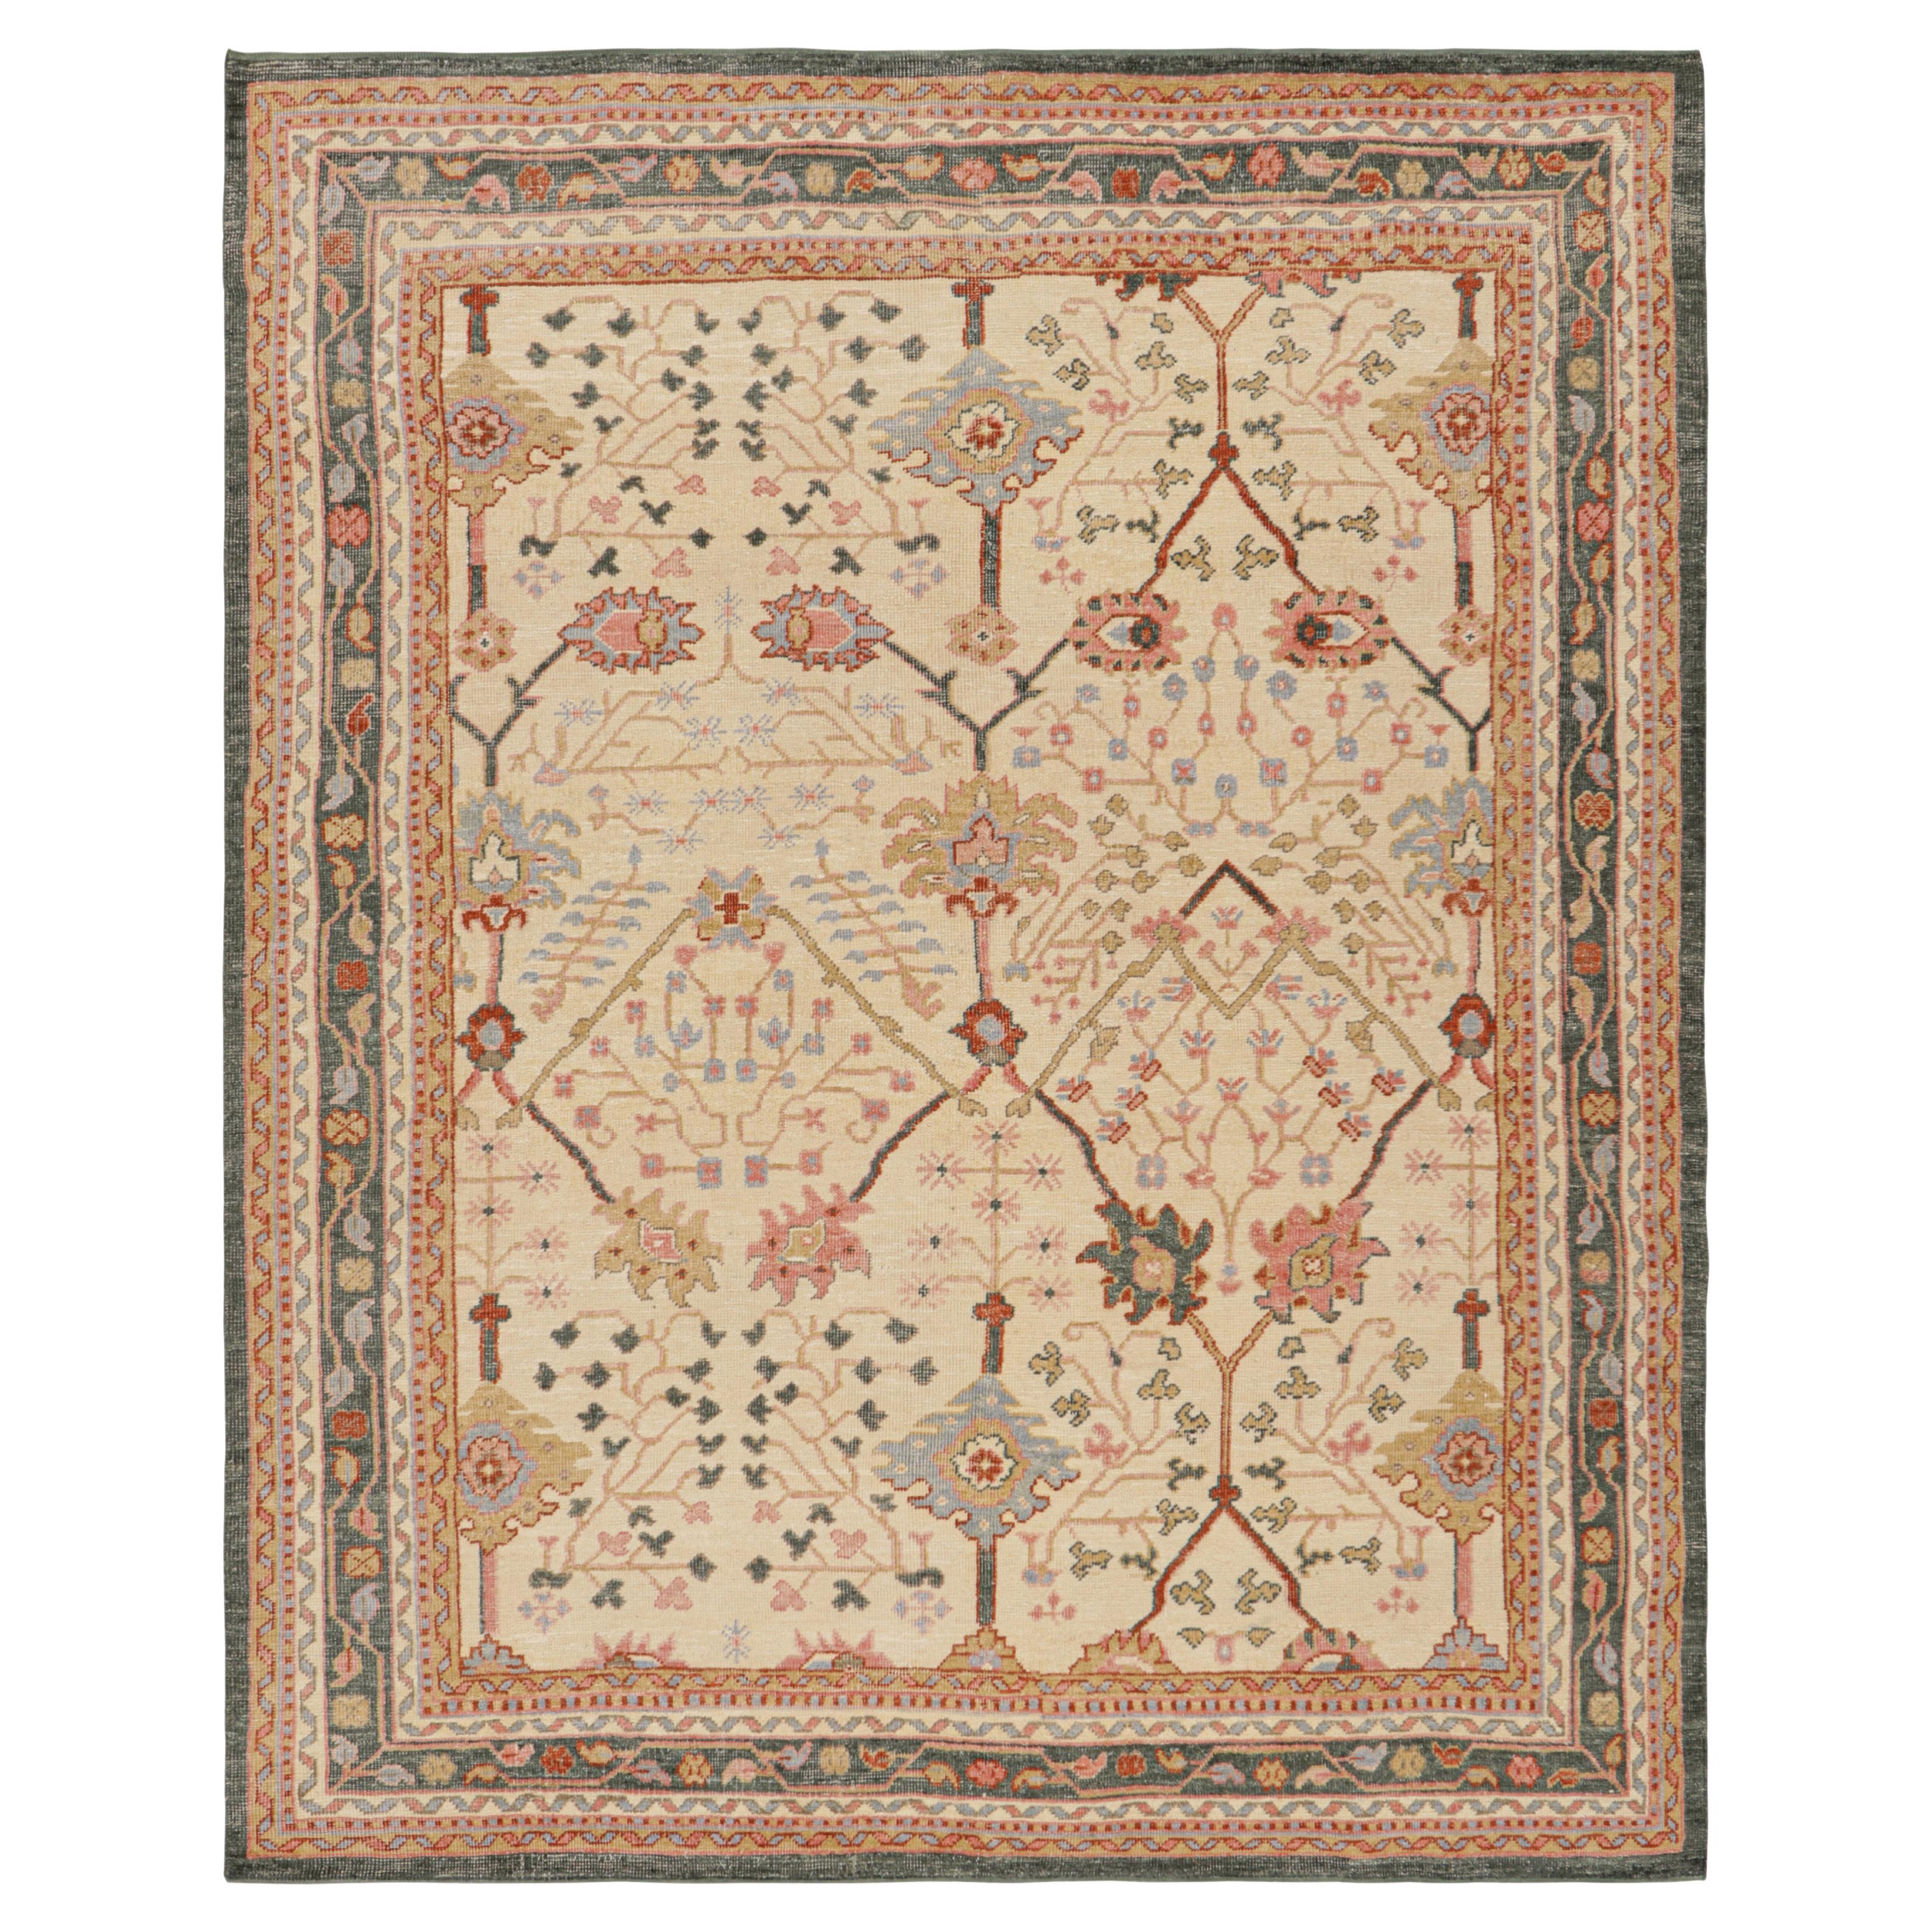 Rug & Kilim’s Oushak Style Rug in Beige-Brown with Colorful Floral Patterns For Sale